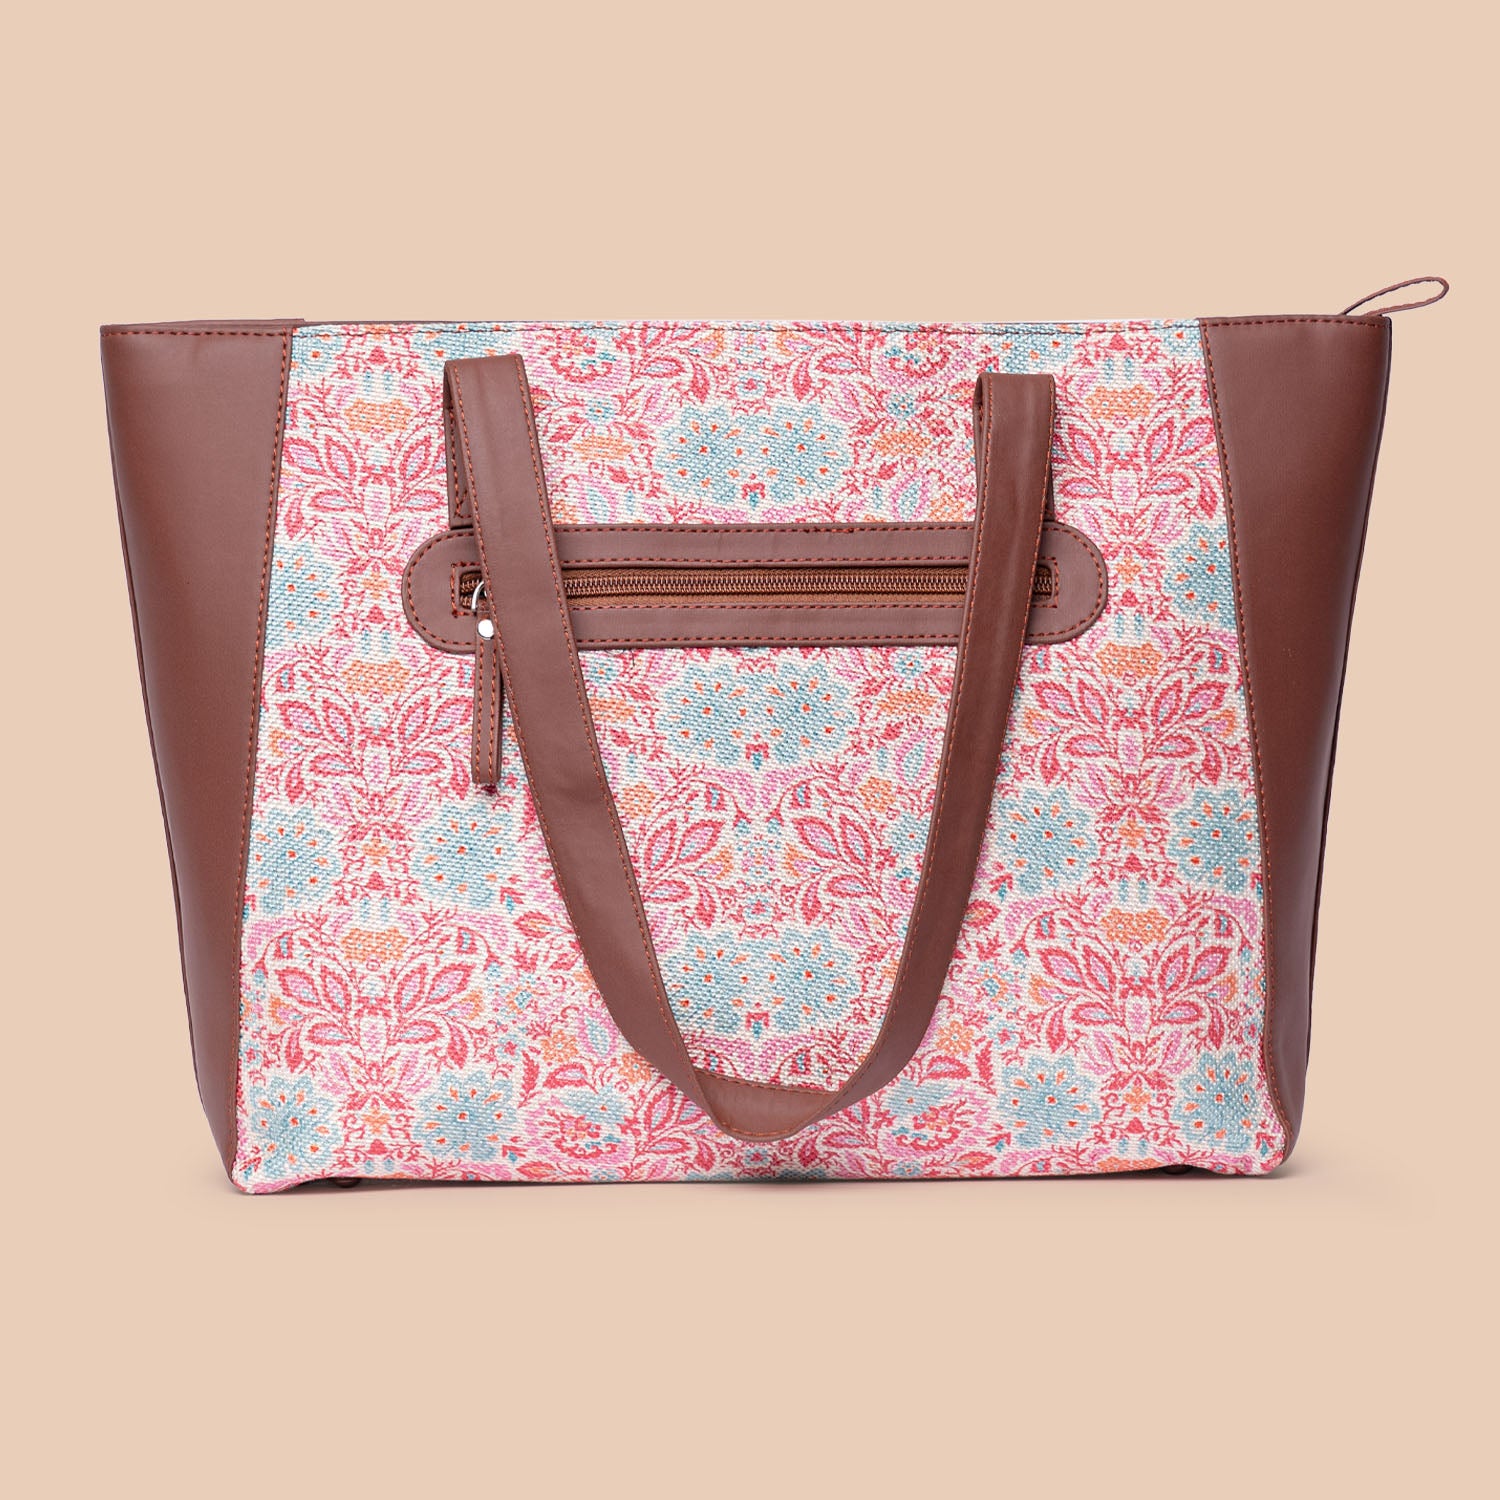 Mangalore Blossoms Side Tote Bag